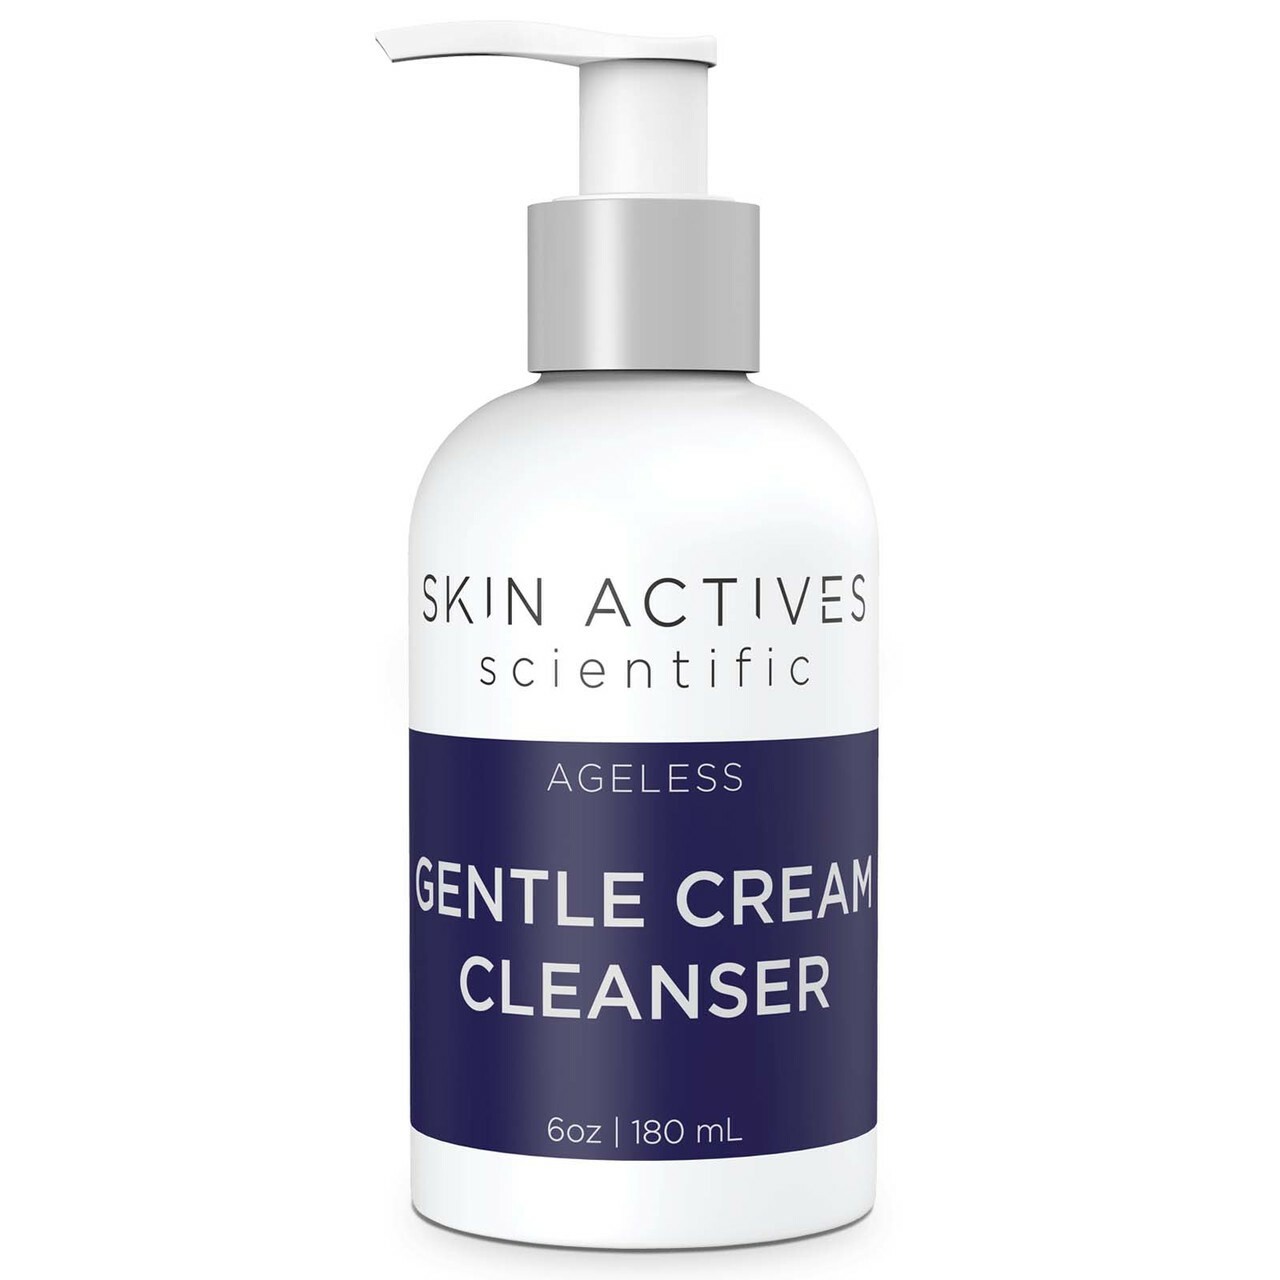 Facial Cleanser - Gentle Soothing Cream - Skin Actives - 6.0 oz.